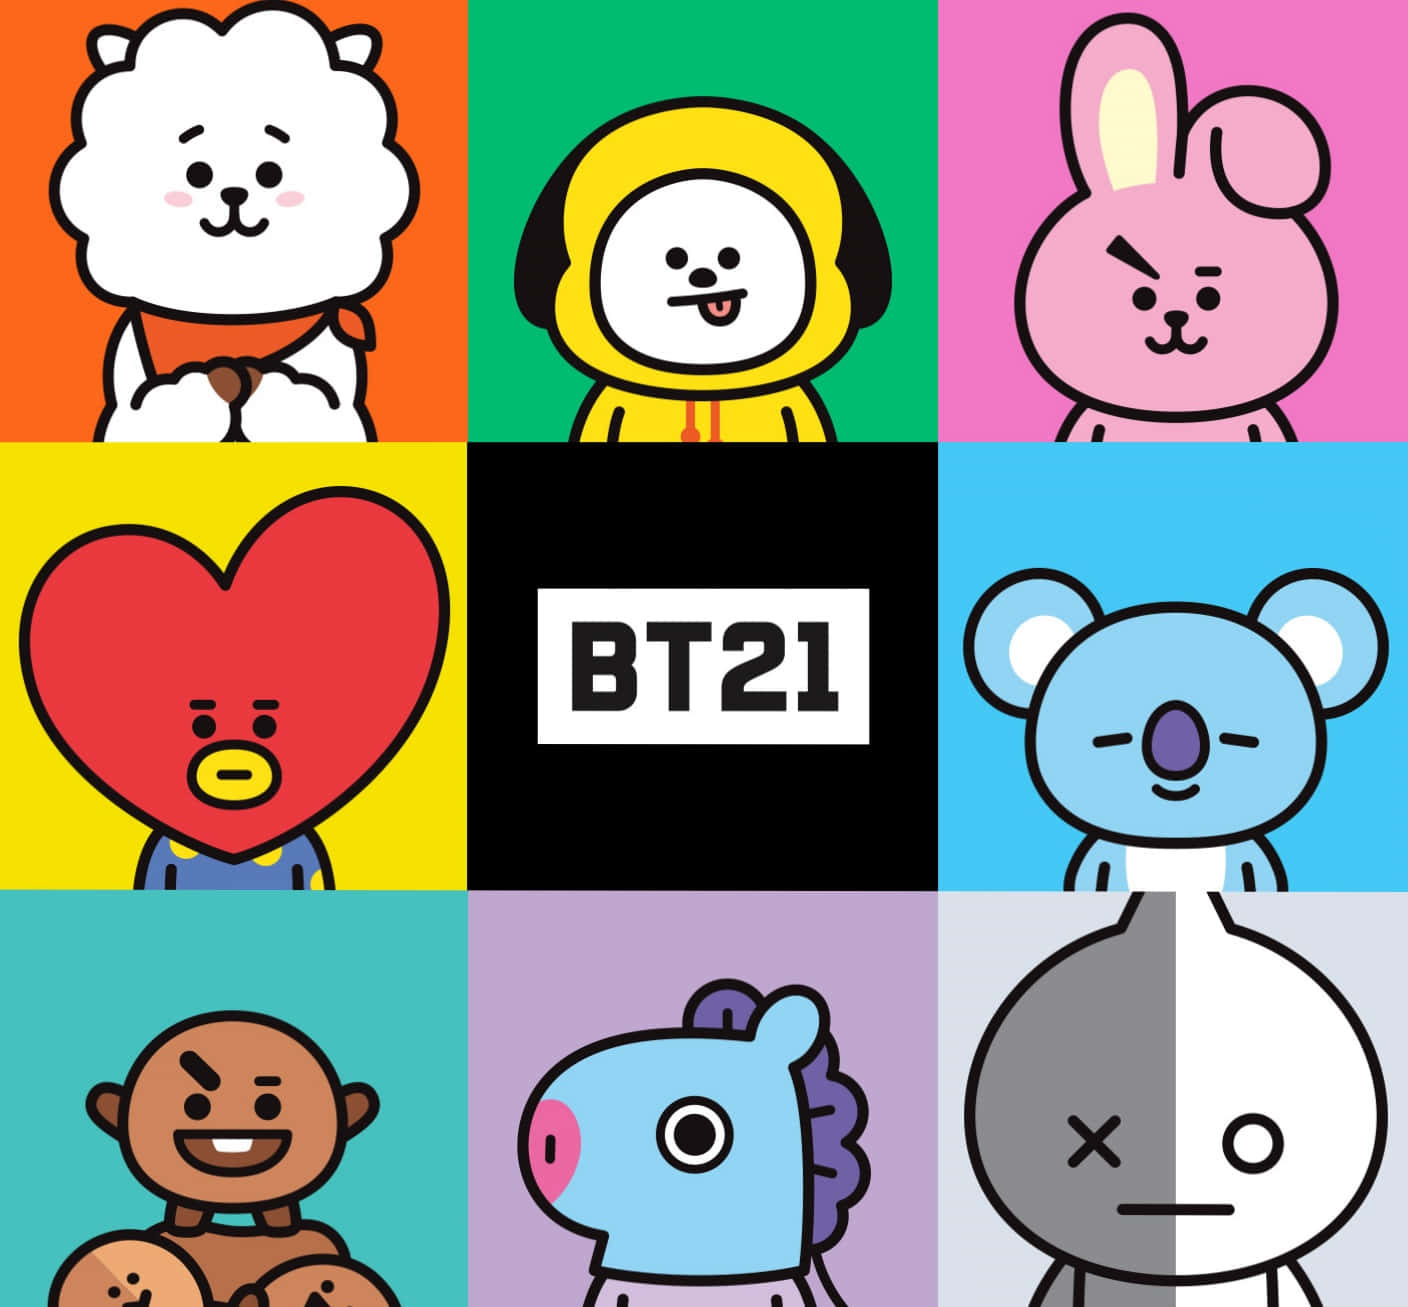 "Come join the BT21 team!"